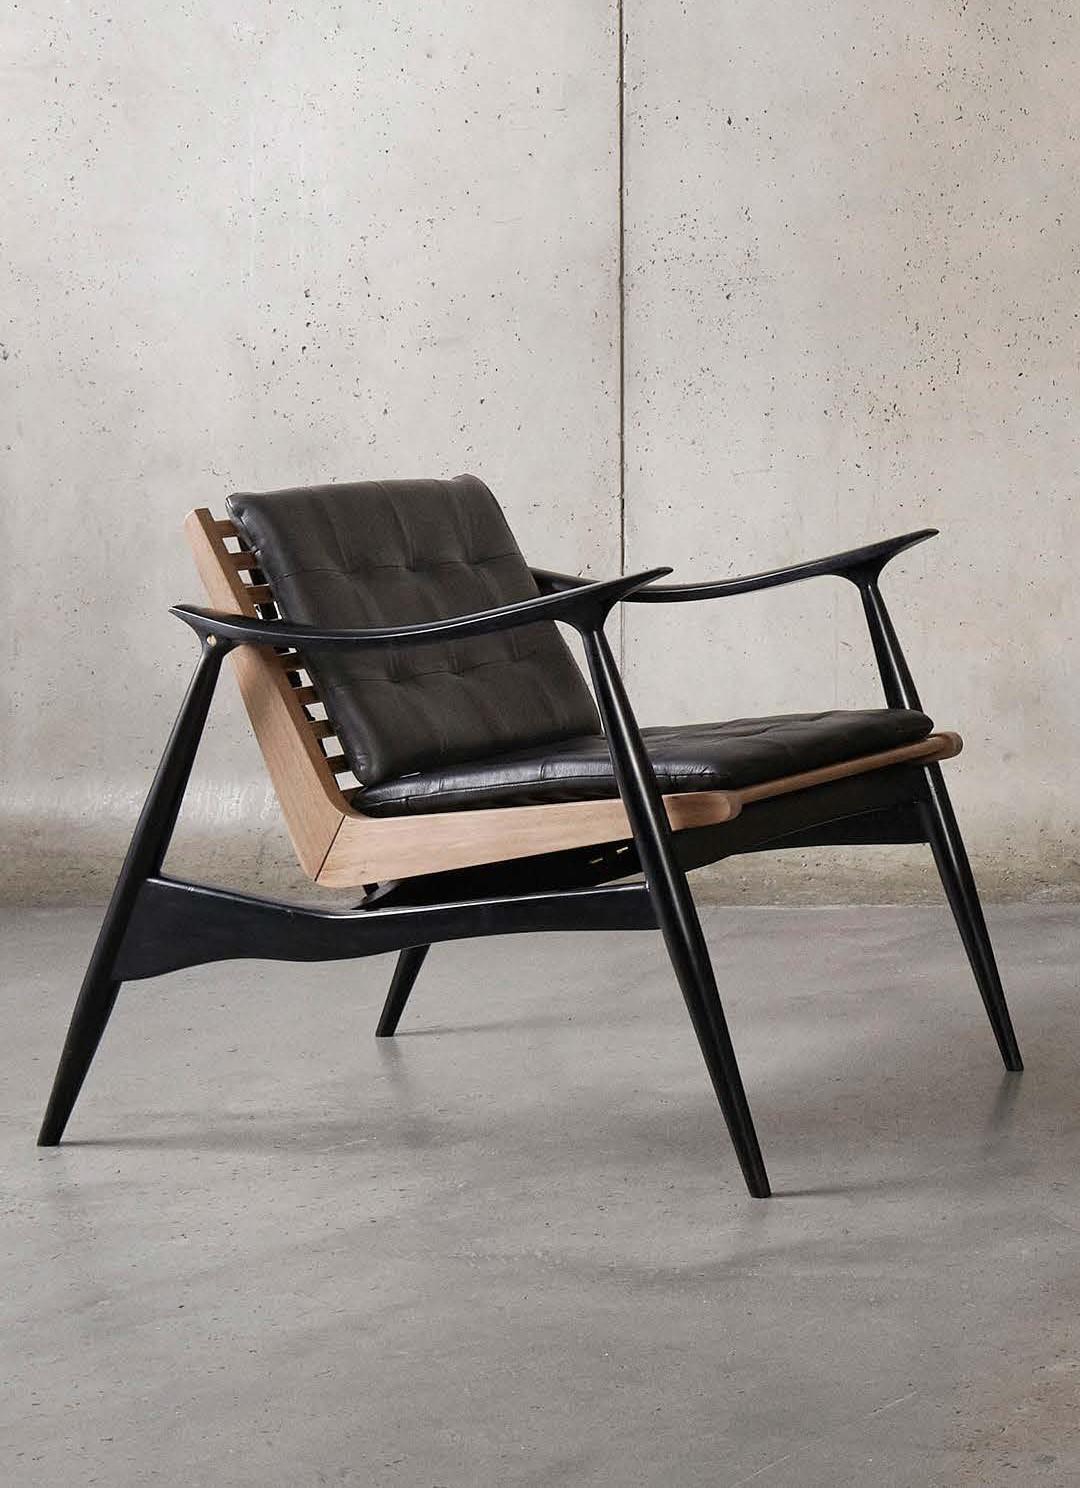 Atra lounge chair by Atra Design
Dimensions: D 92 x W 66 x H 73 cm
Materials: leather, mahogany, walnut
Available in other colors.

Atra Design
We are Atra, a furniture brand produced by Atra form a mexico city–based high end production